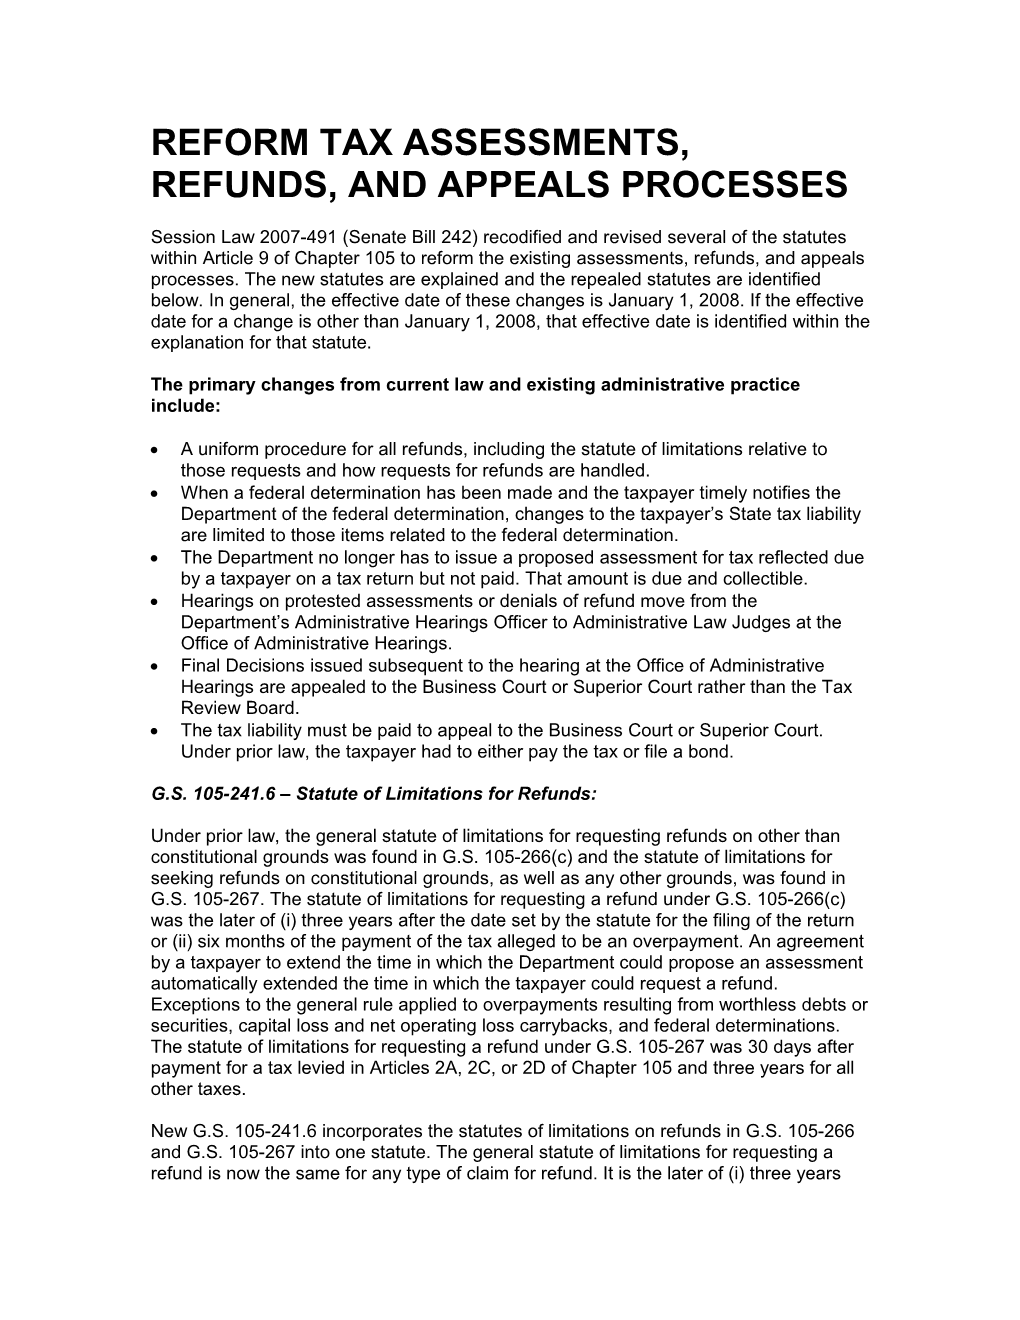 Reform Tax Assessments, Refunds, and Appeals Processes